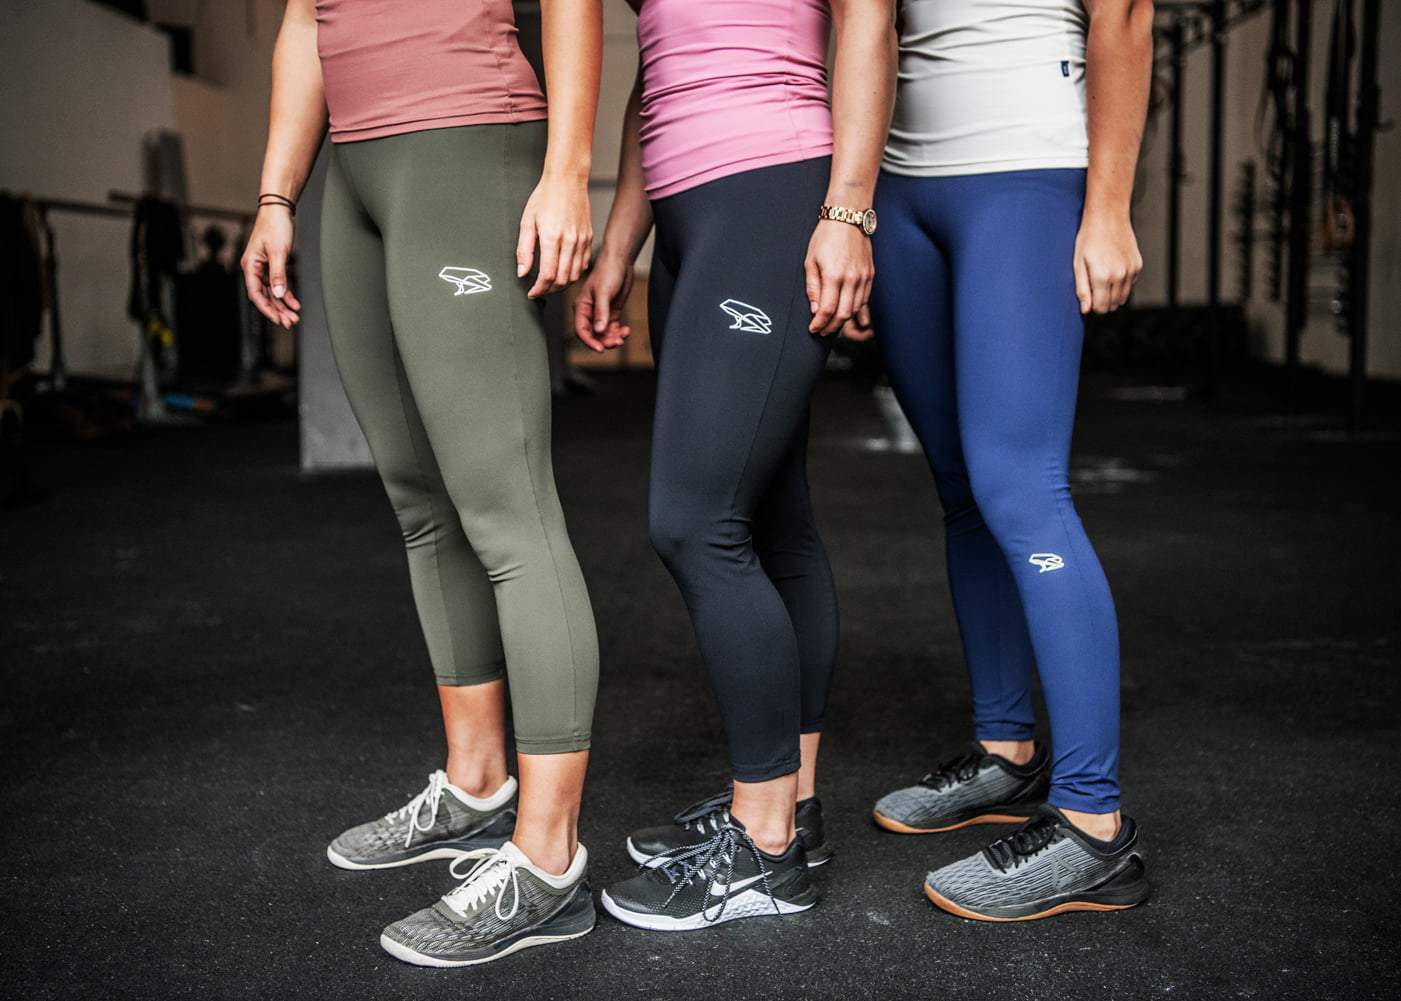 Pressio W's Compression 7/8 Tight  Mid Rise - Eco Dyed Nylon – Weekendbee  - sustainable sportswear